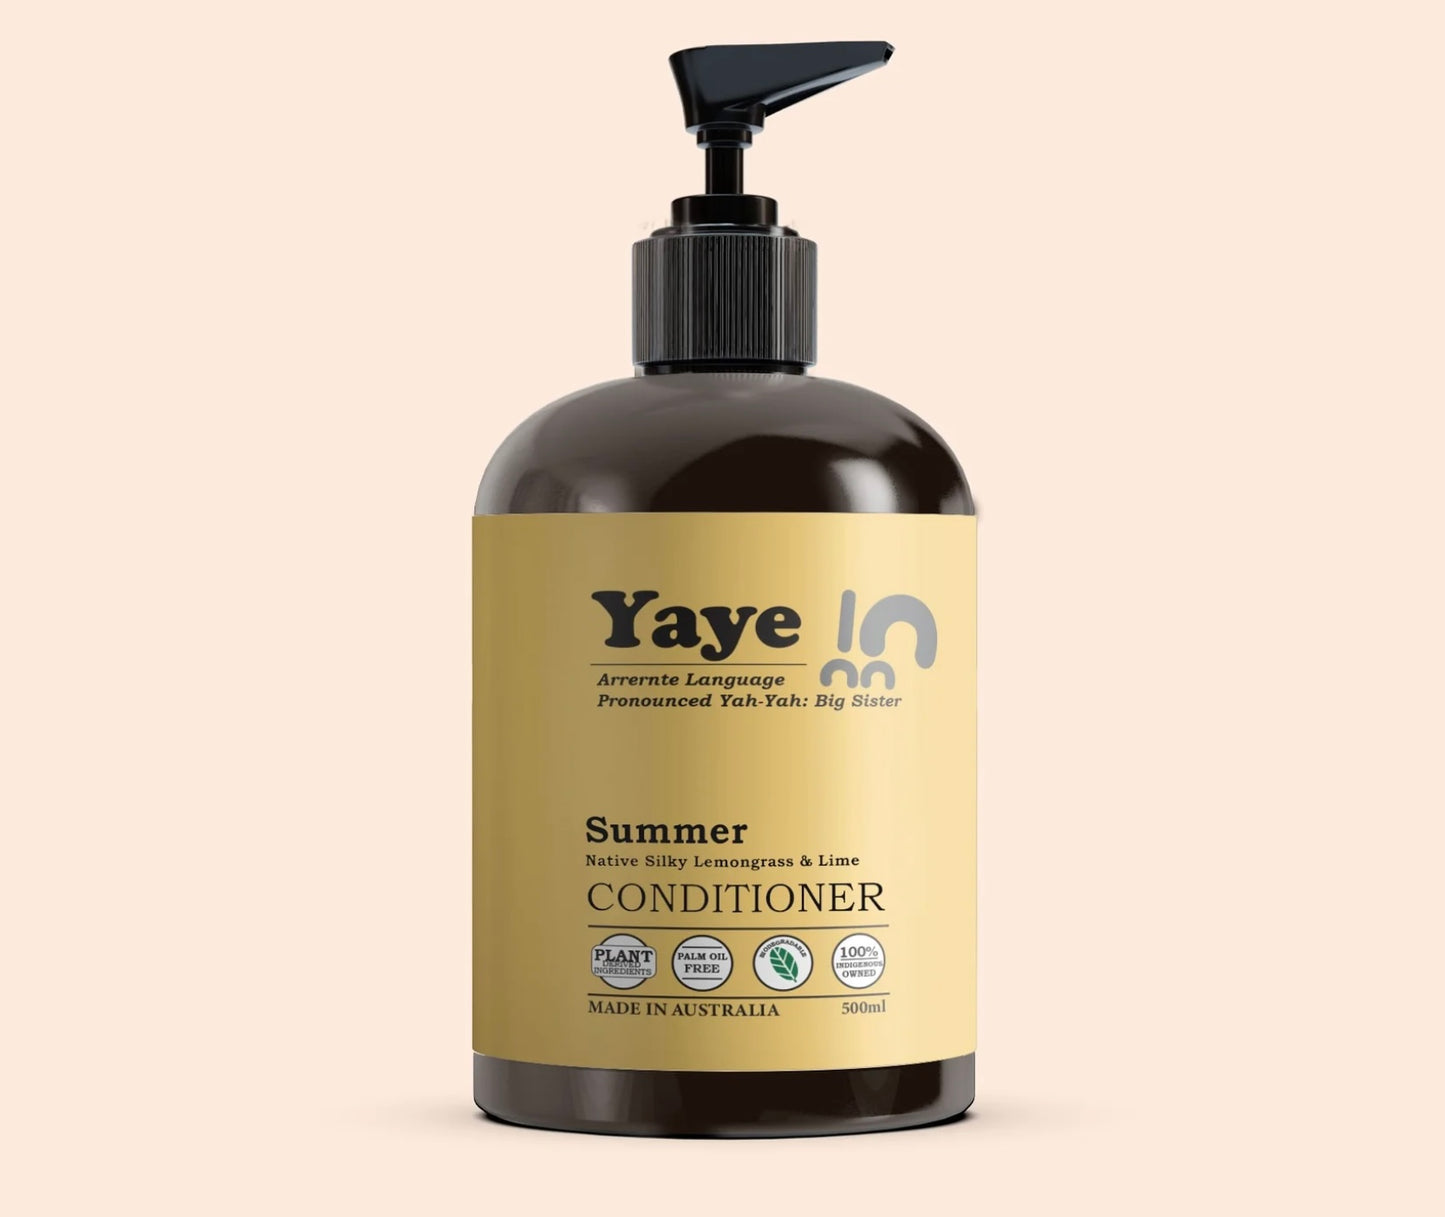 Yaye Shampoo and Conditioner 2 Pack - Native Silky Lemongrass and Lime